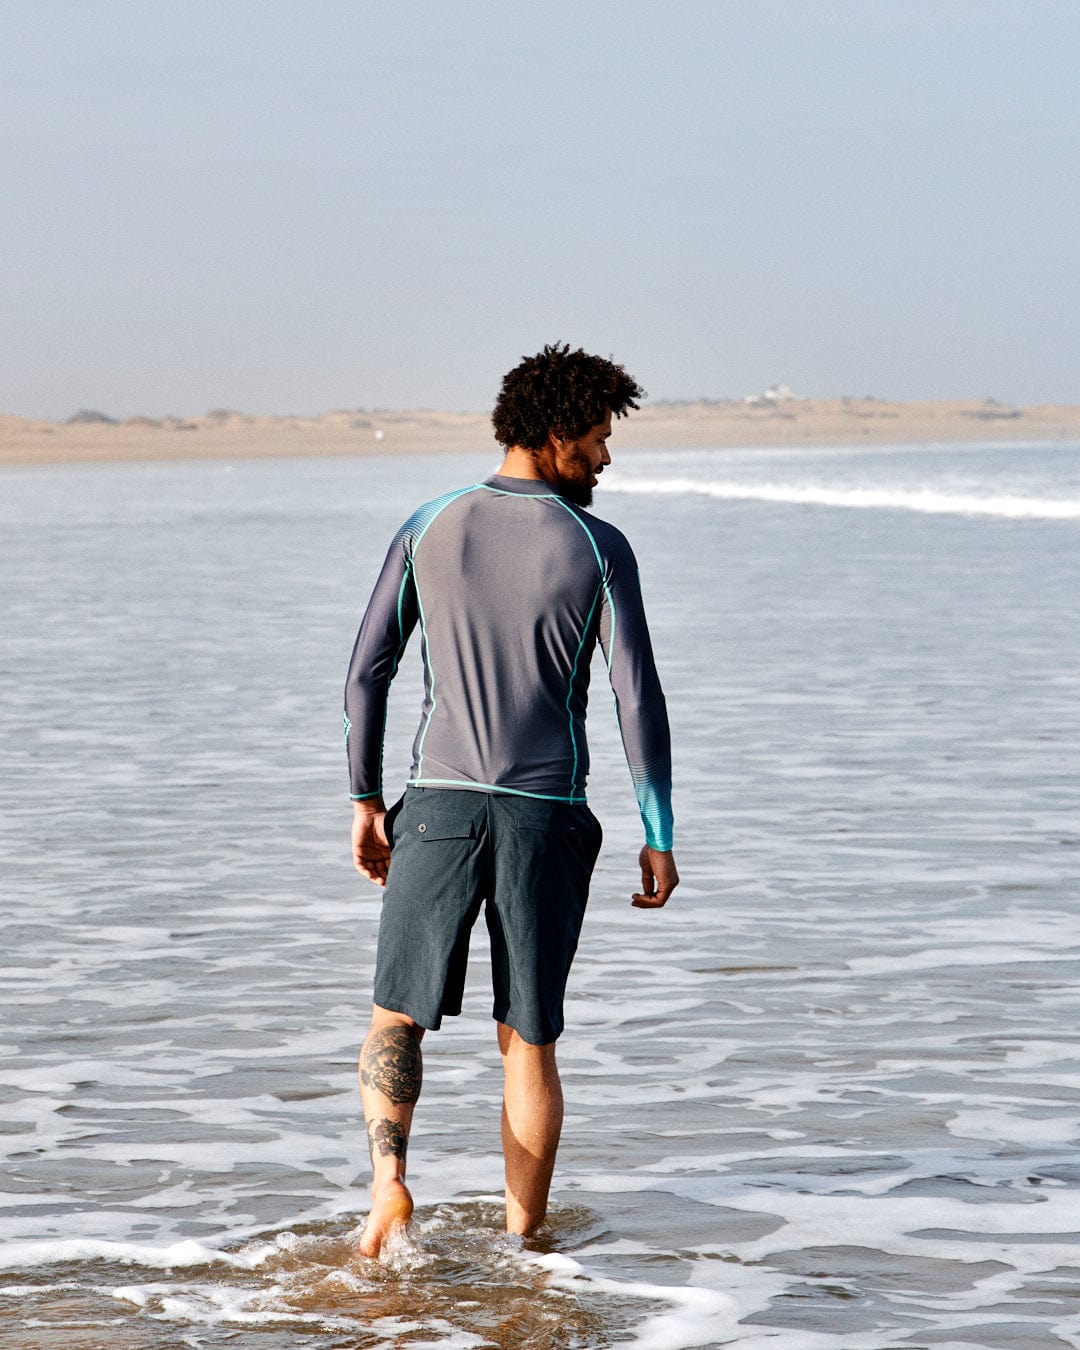 A man with curly hair and a tattoo on his calf walks along the shoreline, wearing a grey and teal Saltrock DNA Wave - Mens Long Sleeve Rashvest and dark shorts.